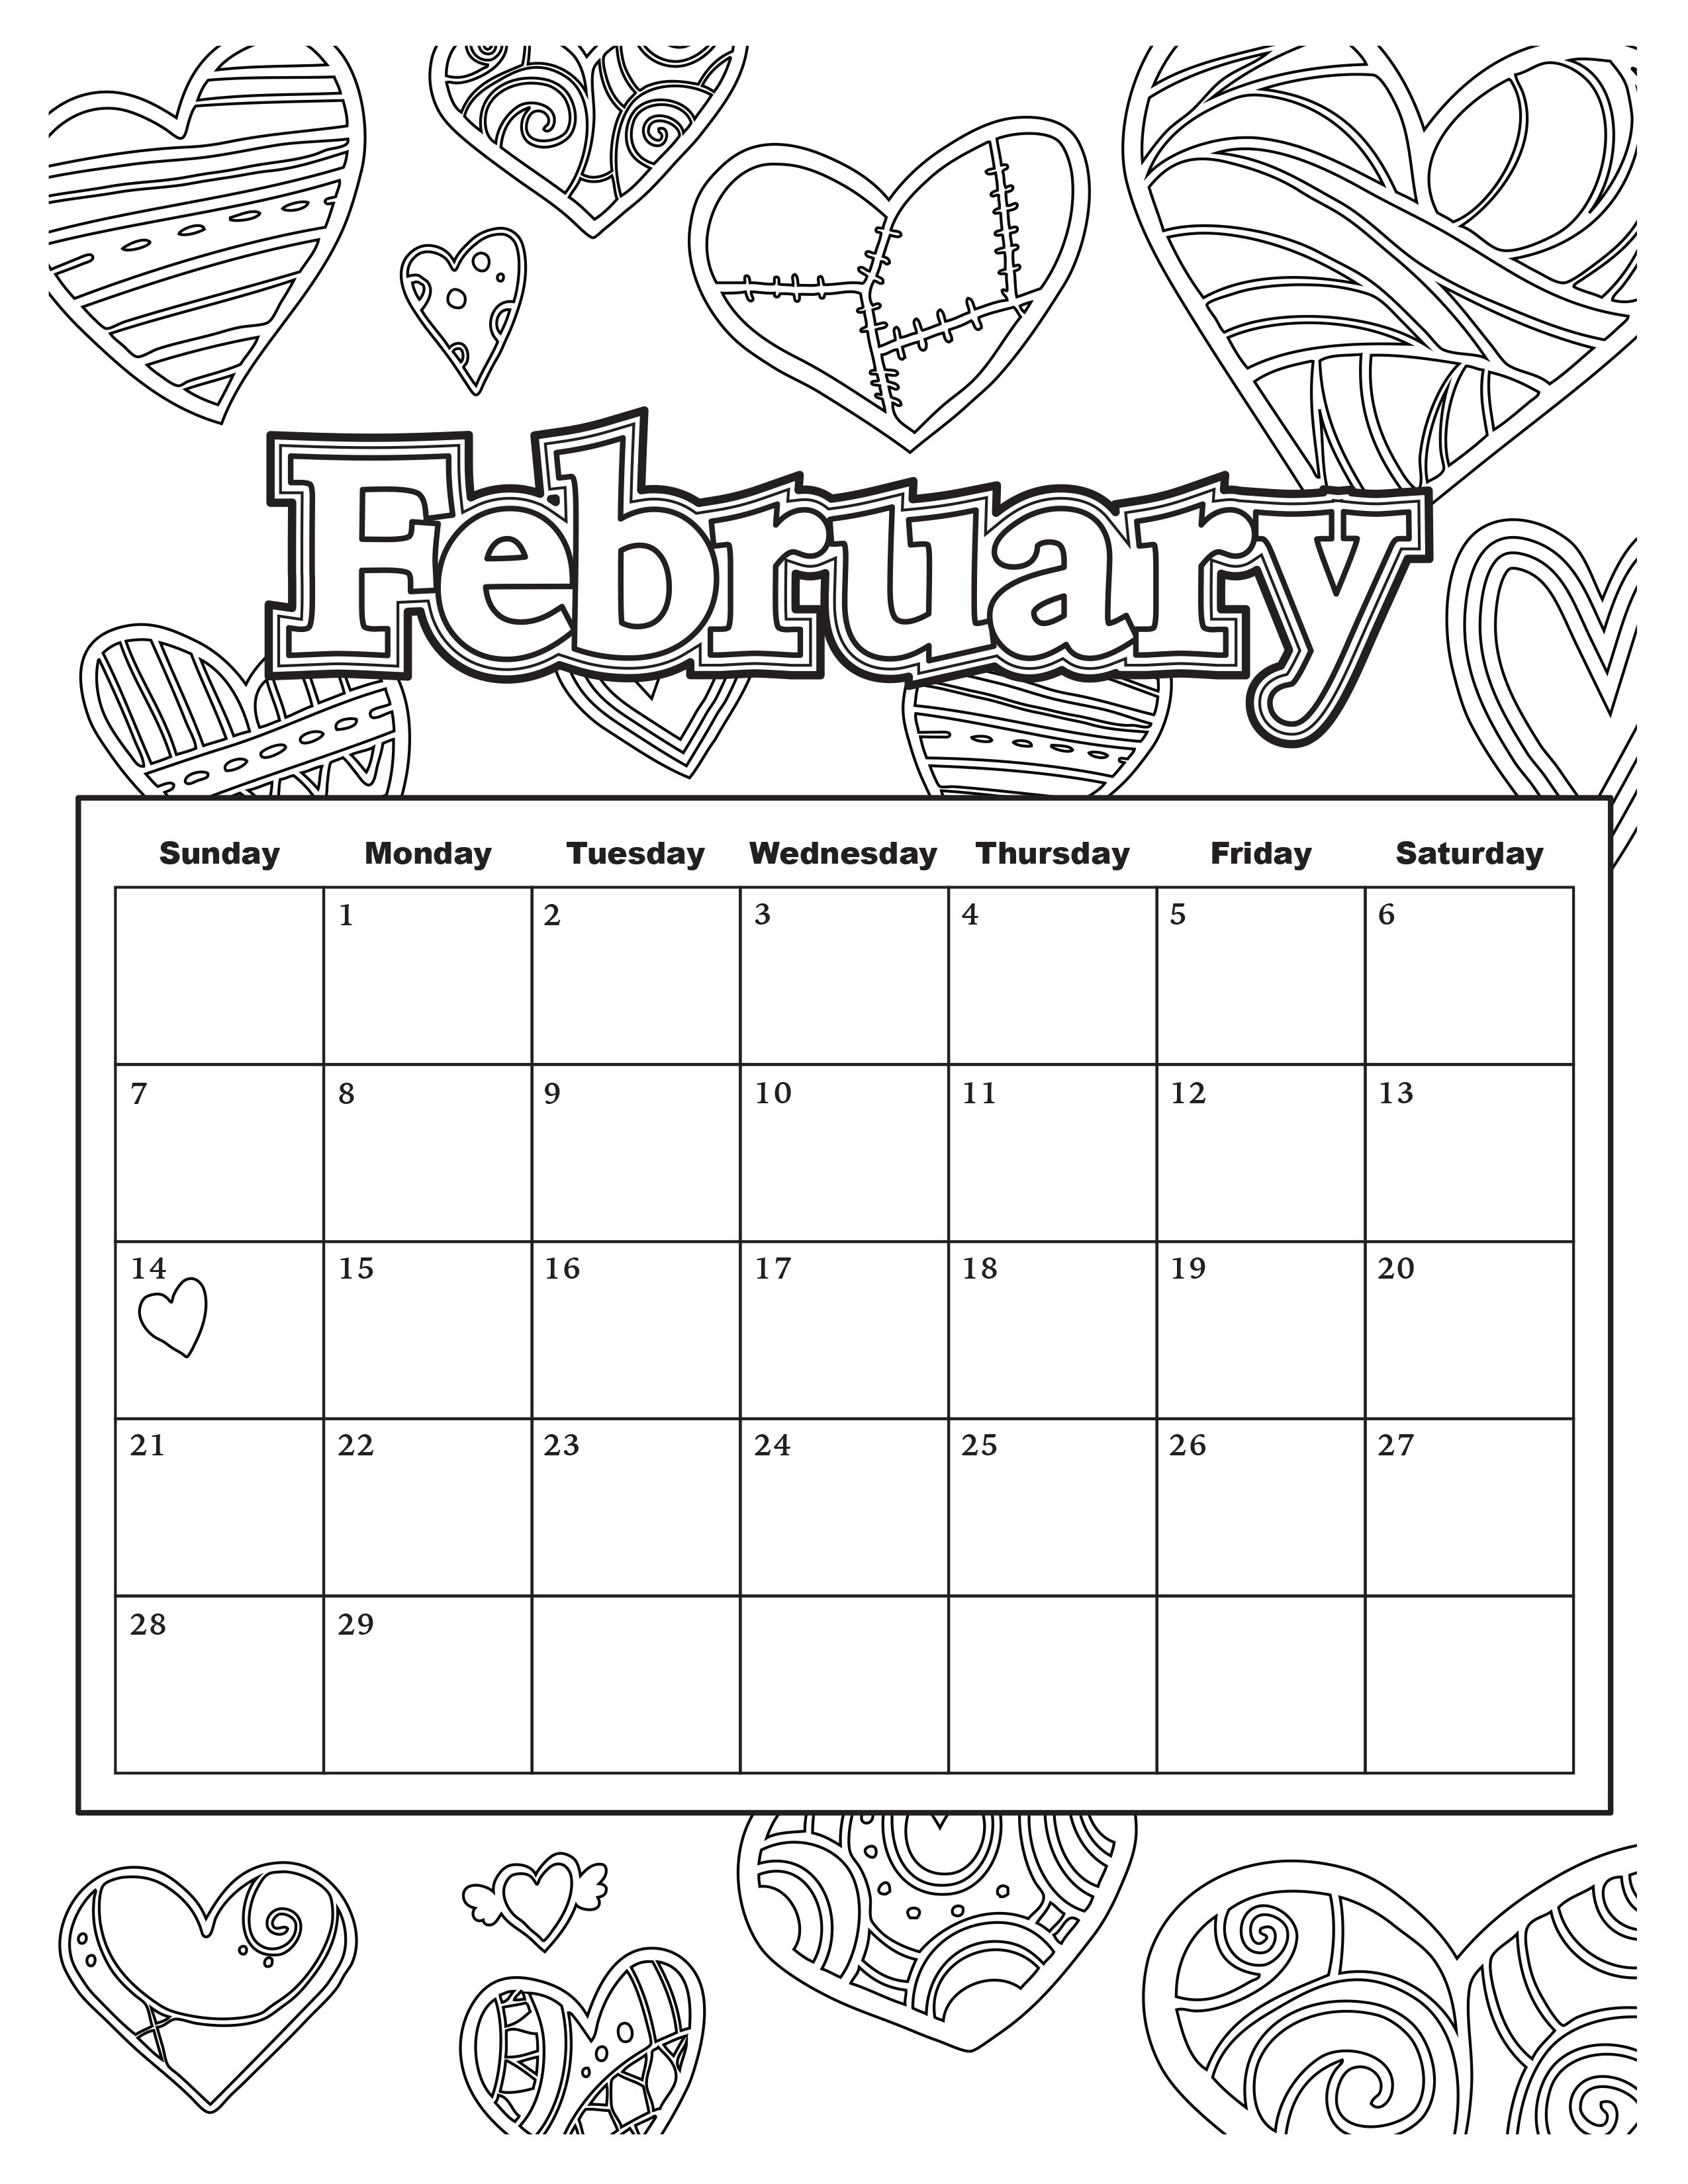 2023-coloring-pages-calendar-calendarlabs-smalltalkwitht-view-calender-coloring-pages-gif